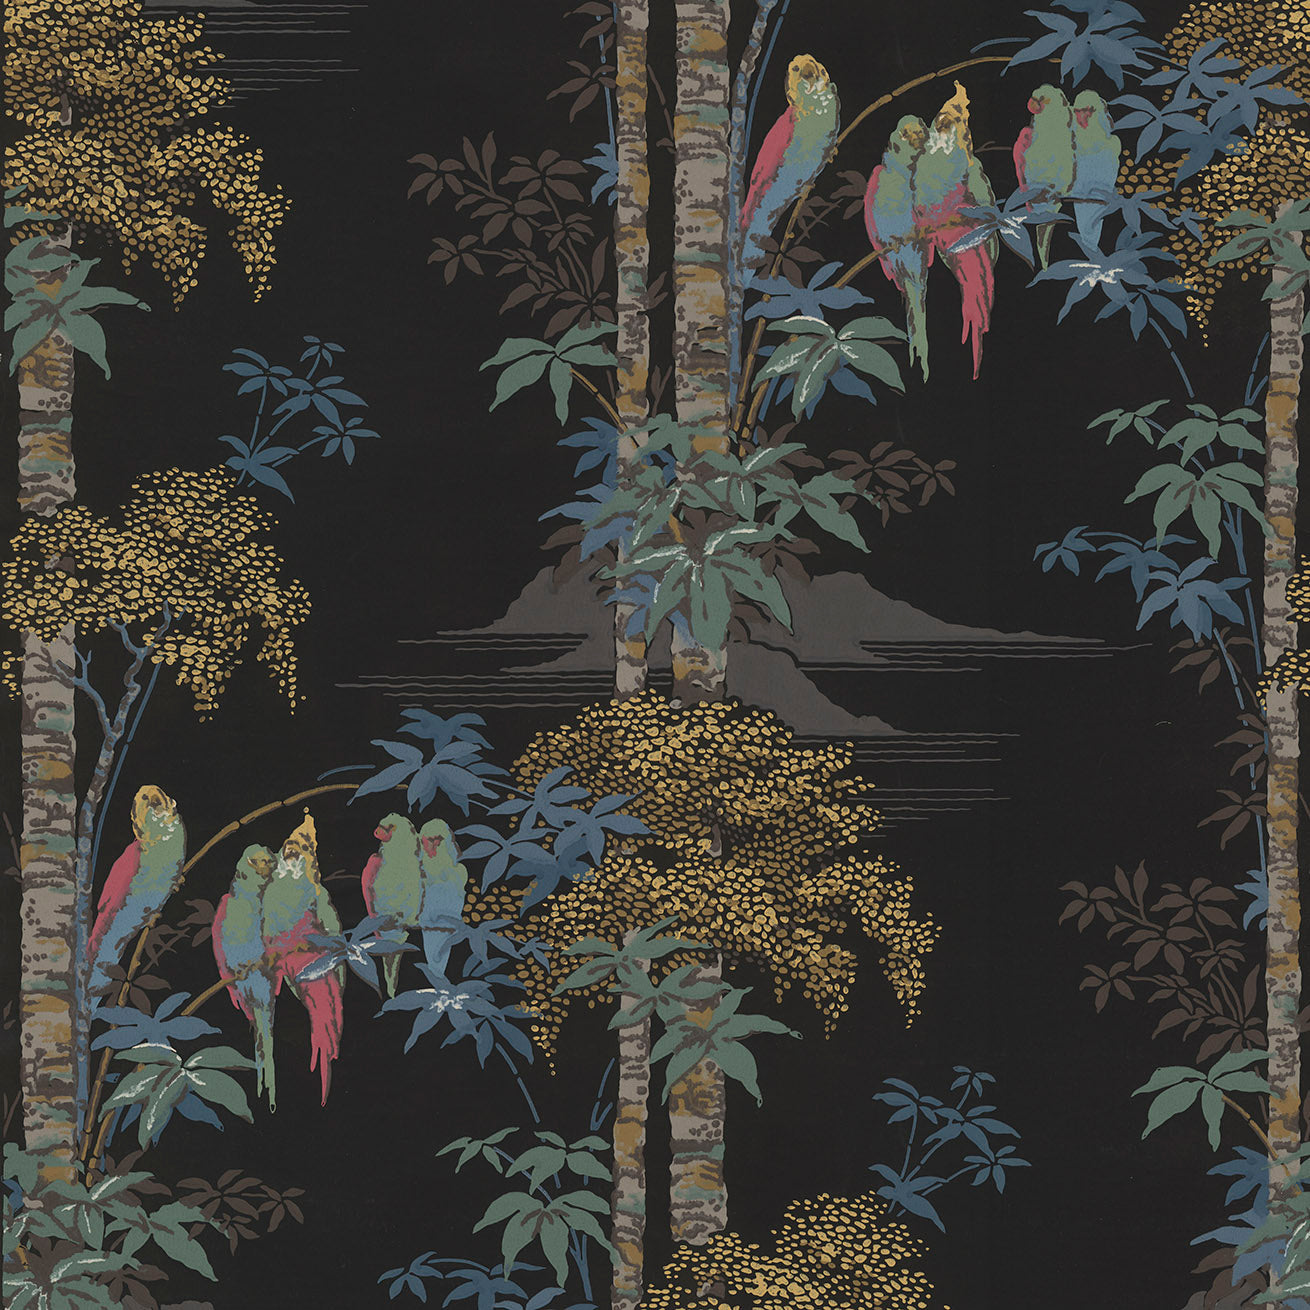 Parakeets in Palm Trees - Antique Wallpaper Remnant